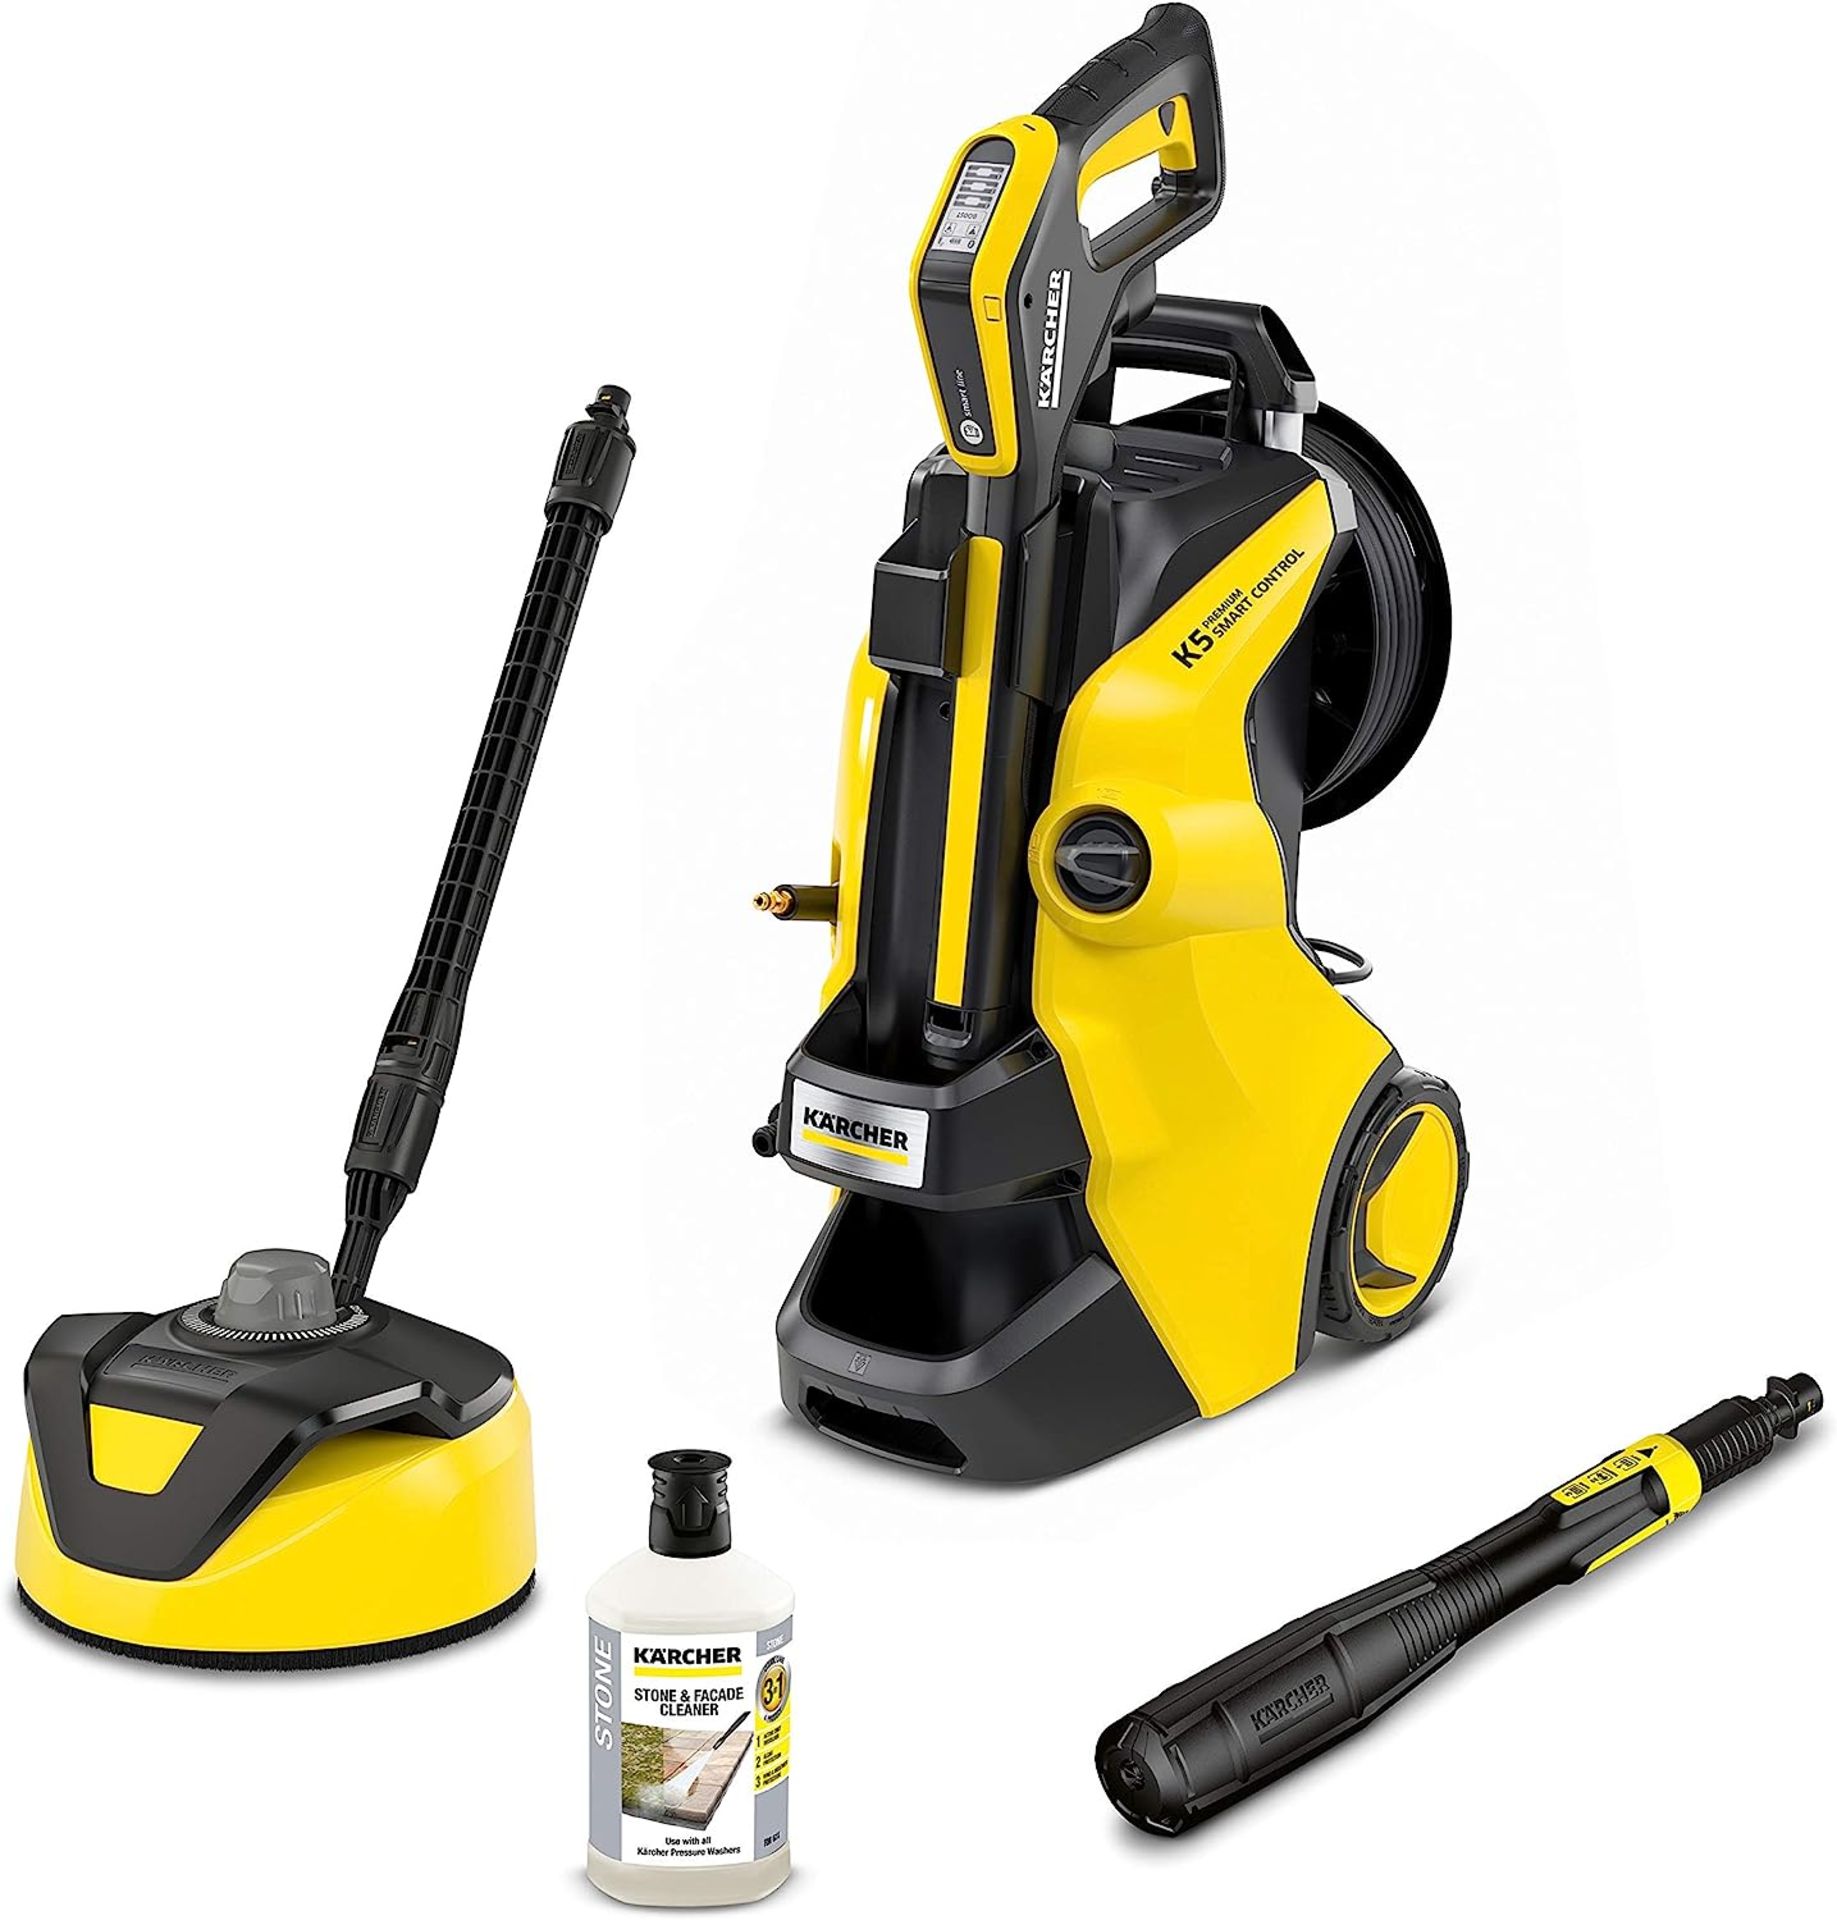 BRAND NEW KARCHER K5 SMART CONTROL CORDED PRESSURE WASHER 2.1KW RRP £427 R16-8